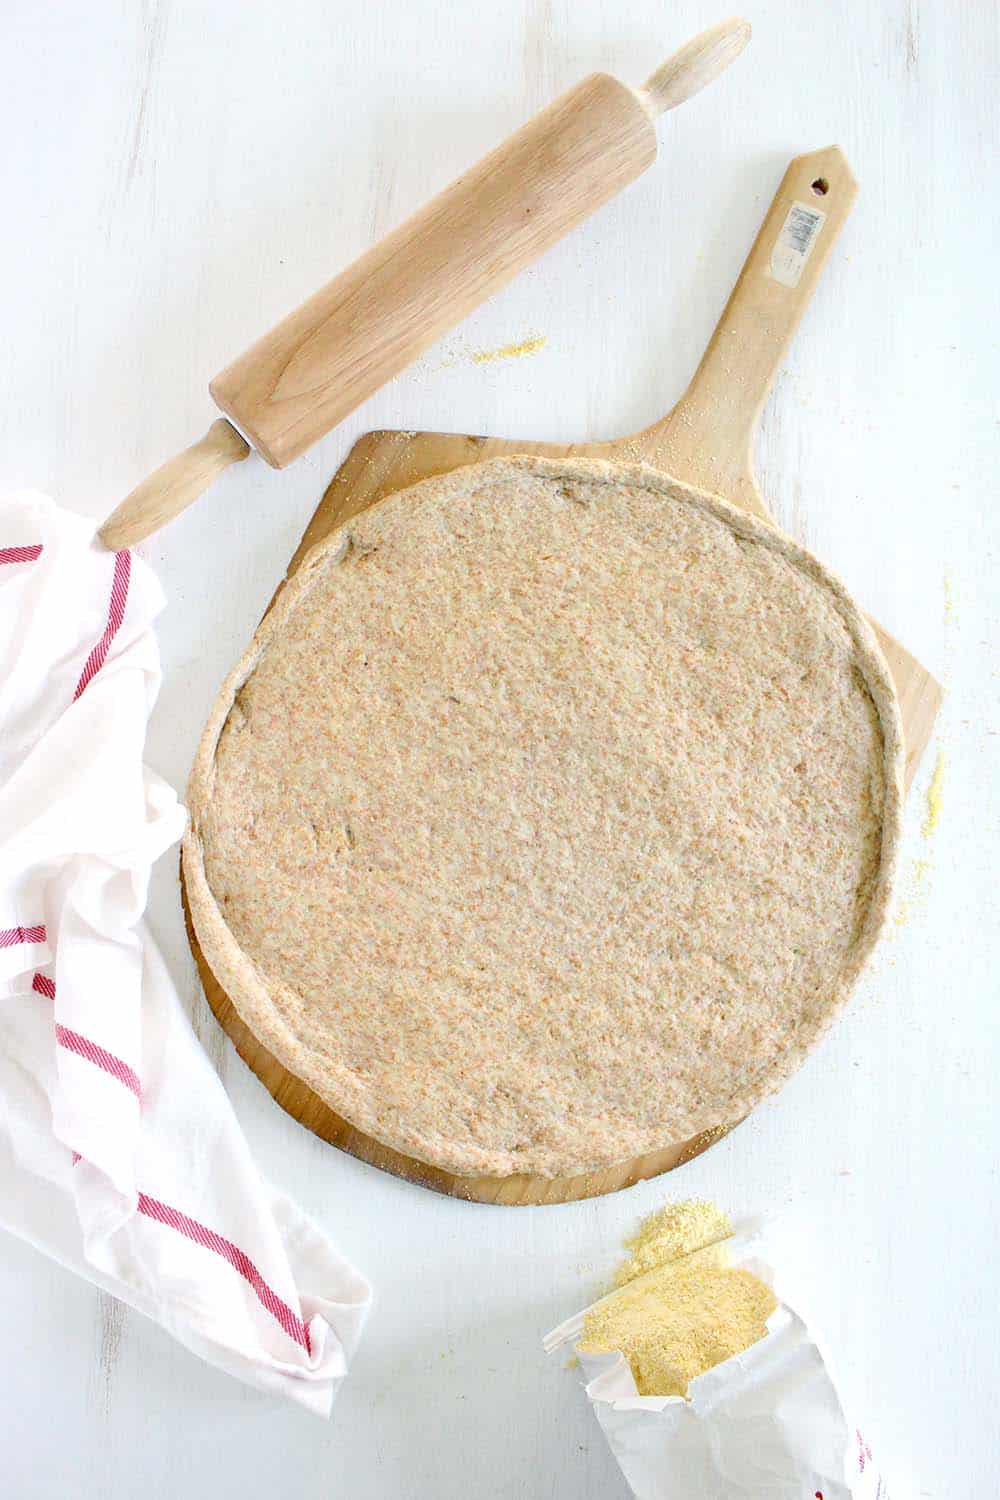 Flattened, rolled-out whole wheat pizza dough on a wooden pizza peel.